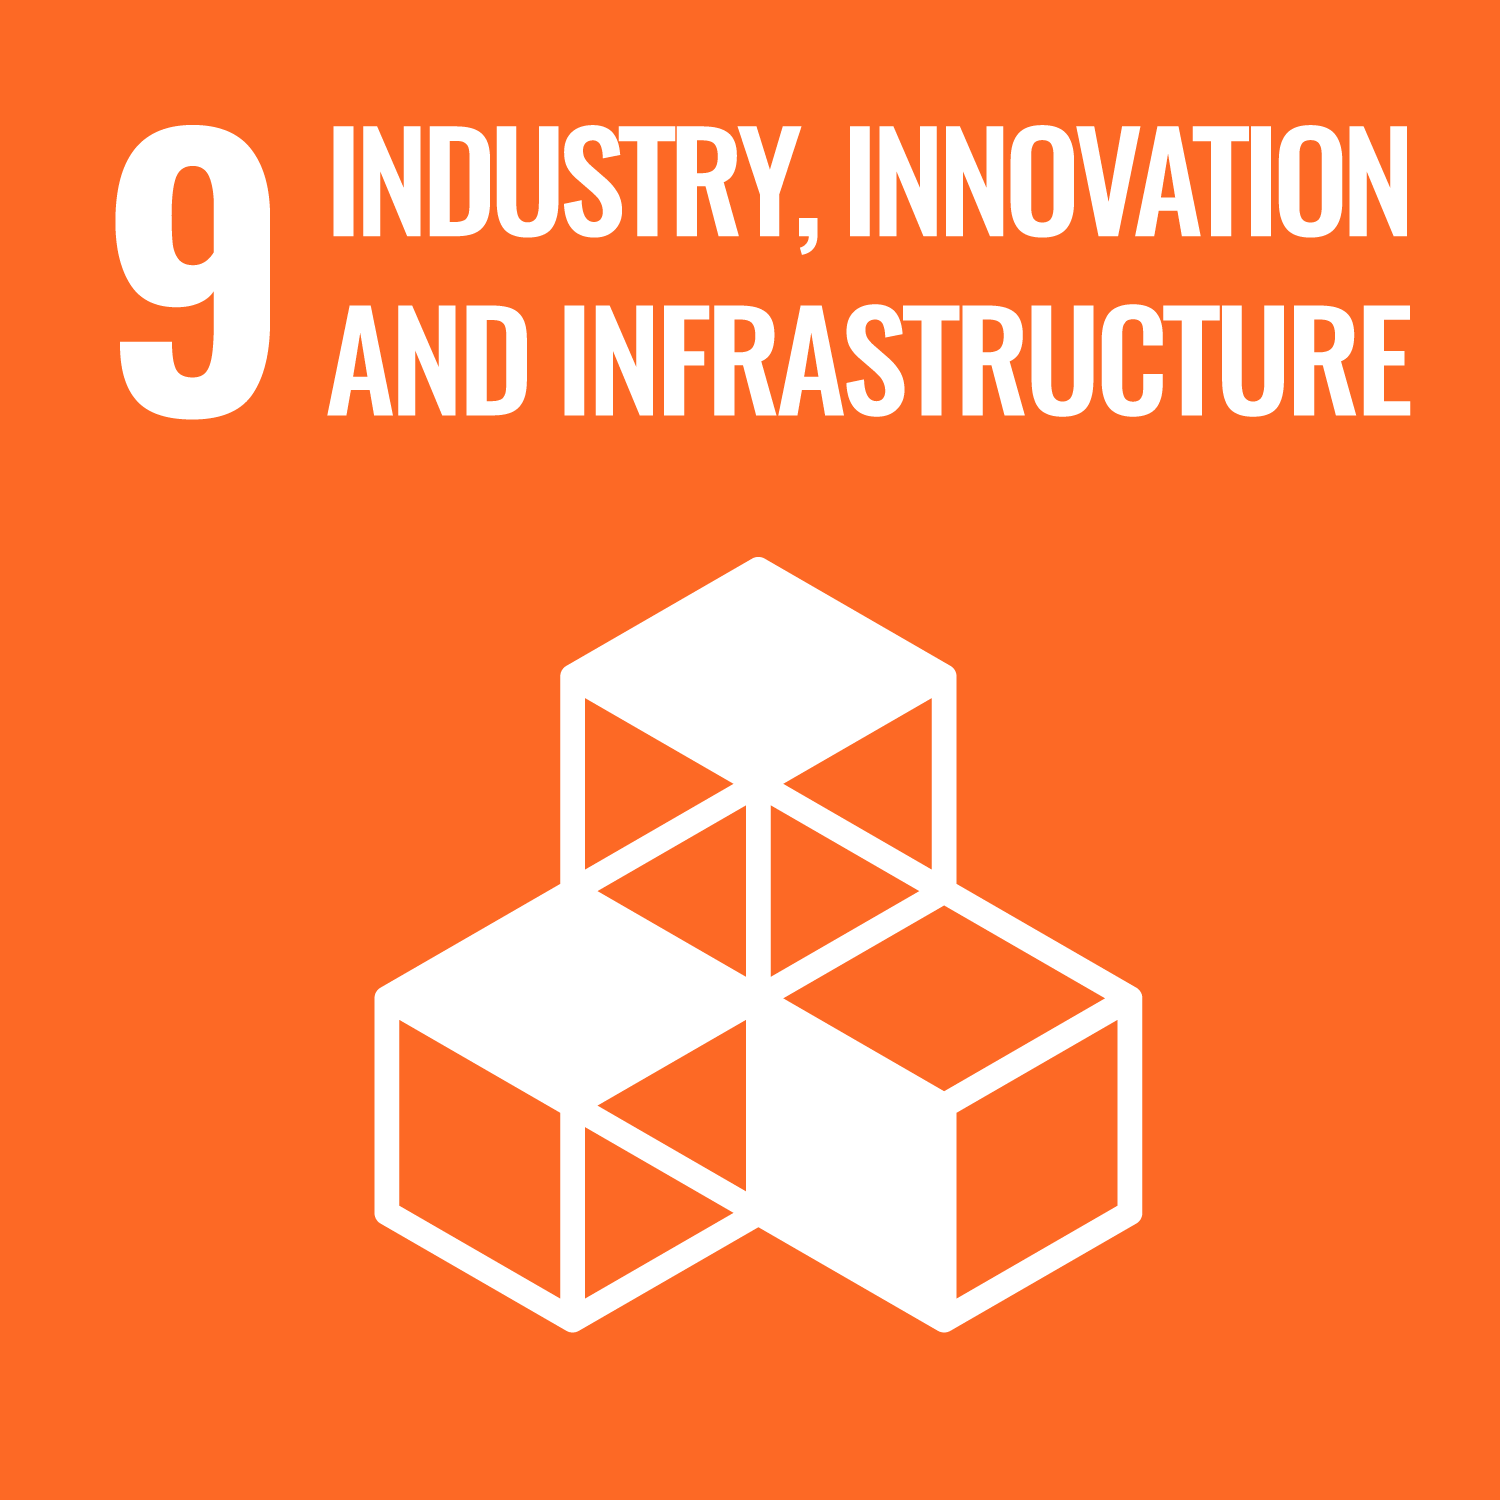 United Nation's 17 Sustainable Development Goals: Goal Number 9: Industry, Innovation, and Infrastructure